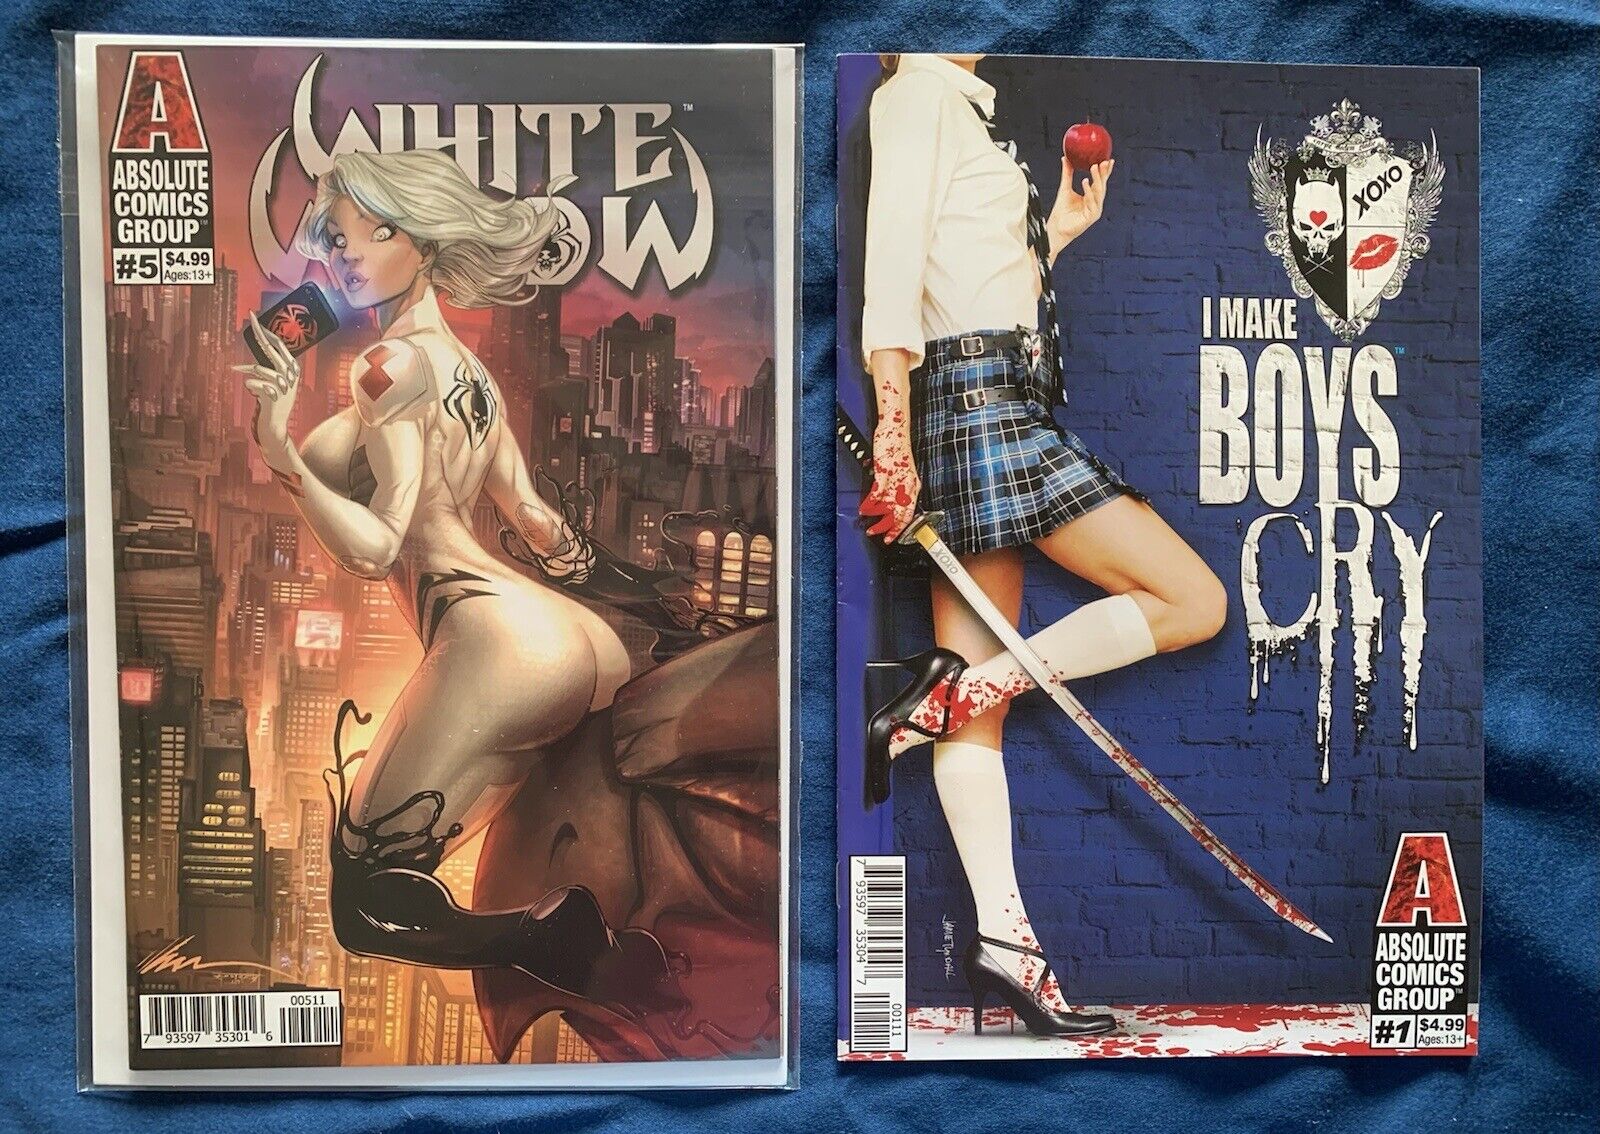 WHITE WIDOW #5 & I MAKE BOYS CRY #1 (2019 Absolute Comics Group) Crossover